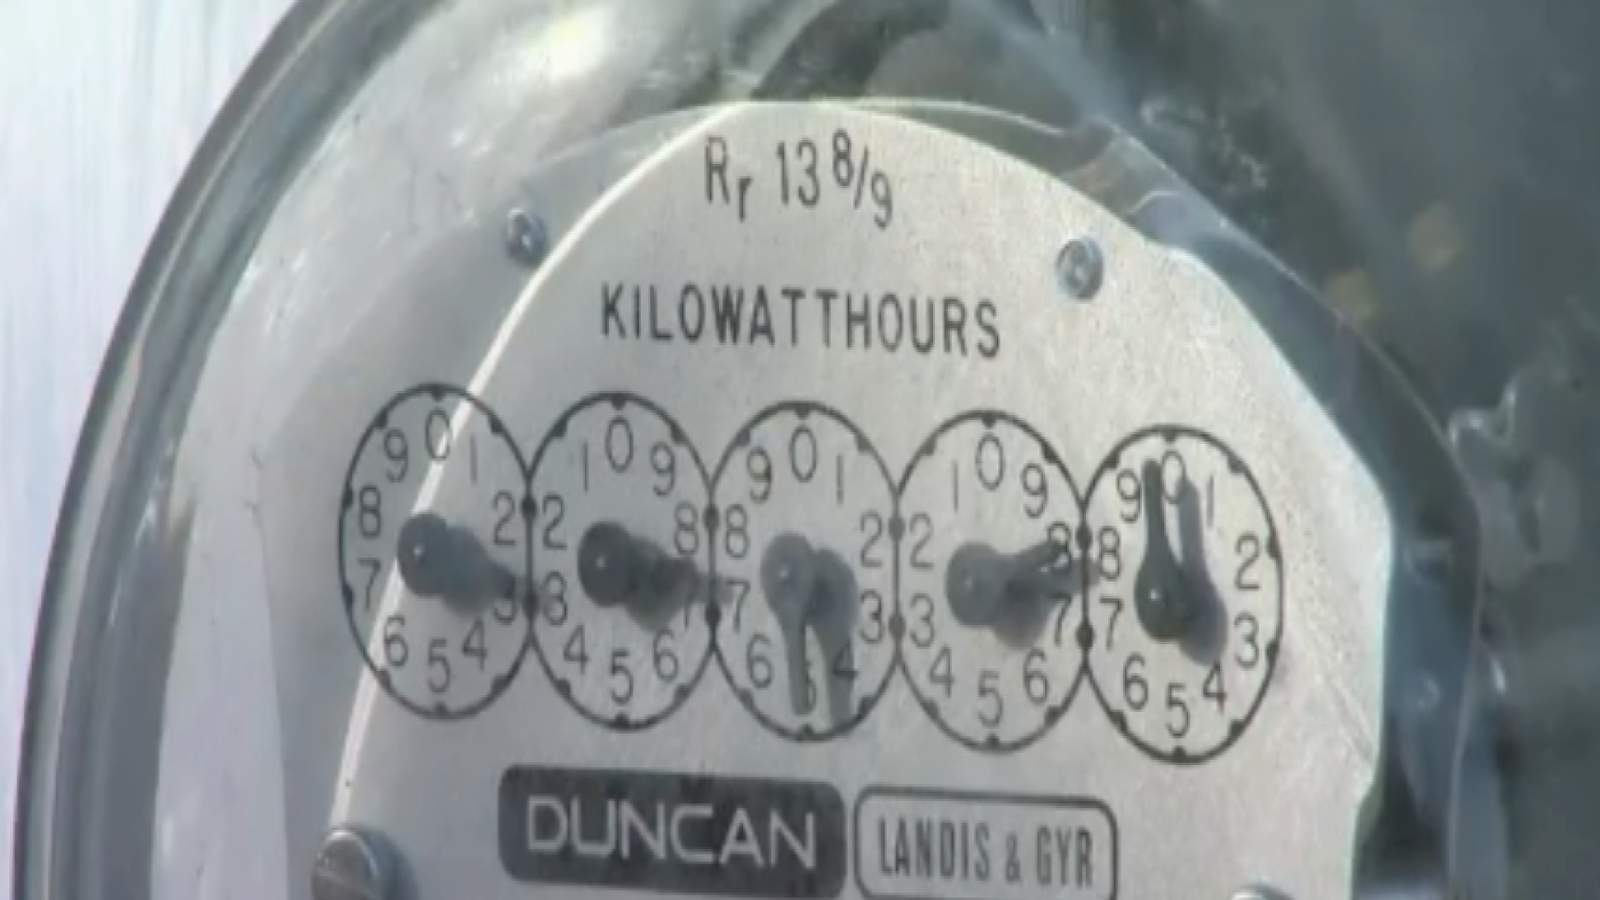 PUC votes to not disconnect power service, but customers could begin seeing late fees on water and energy bills soon